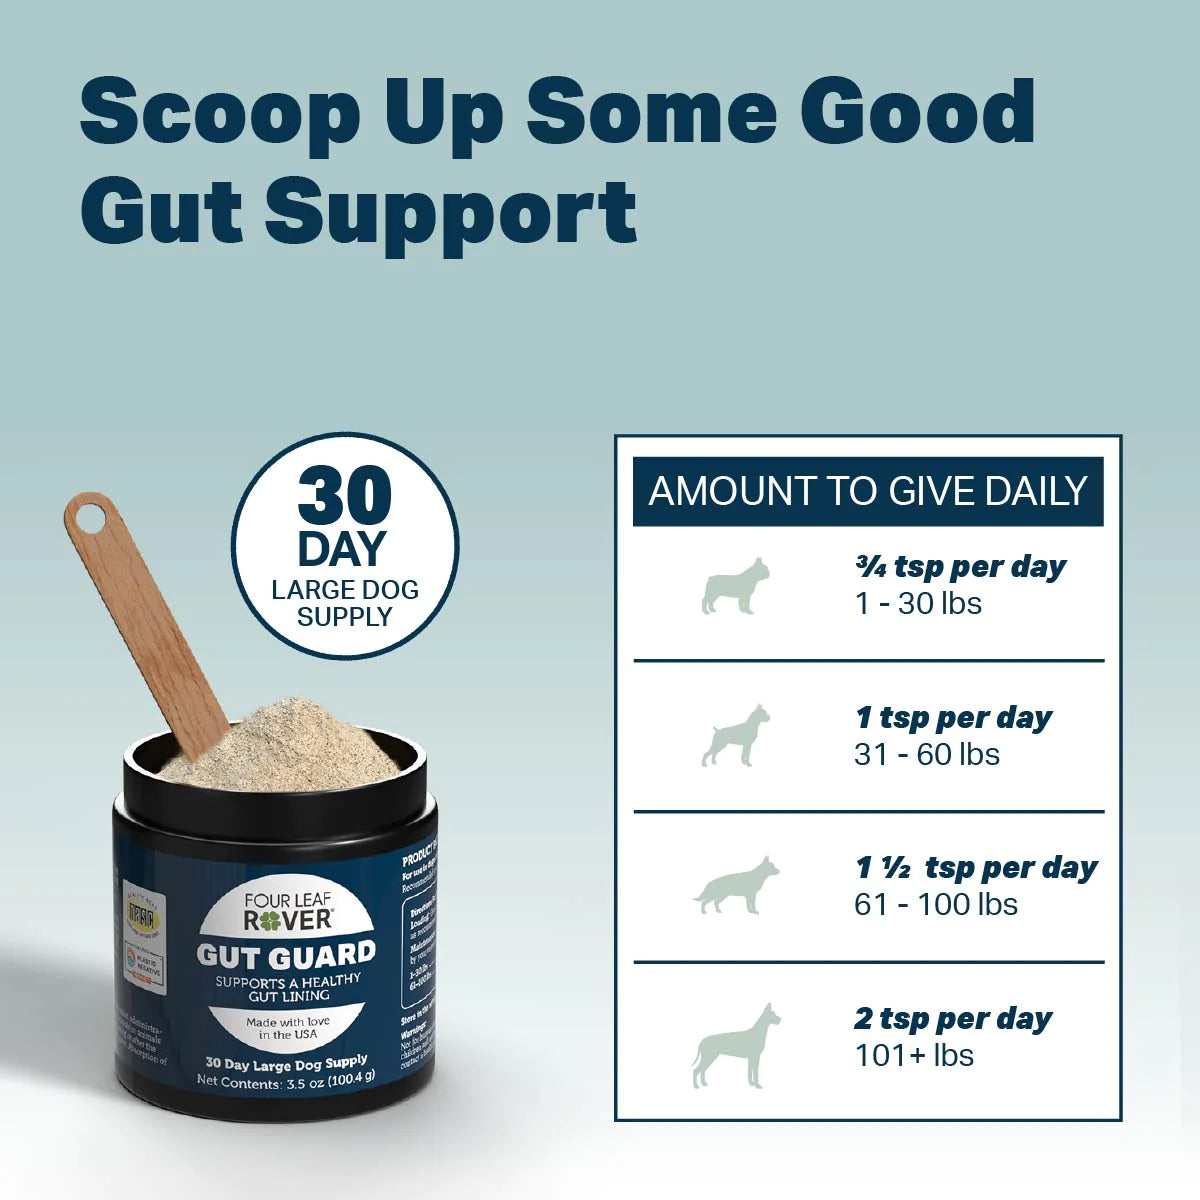 Four Leaf Rover Gut Guard | Goodbye Irritated, Leaky Gut